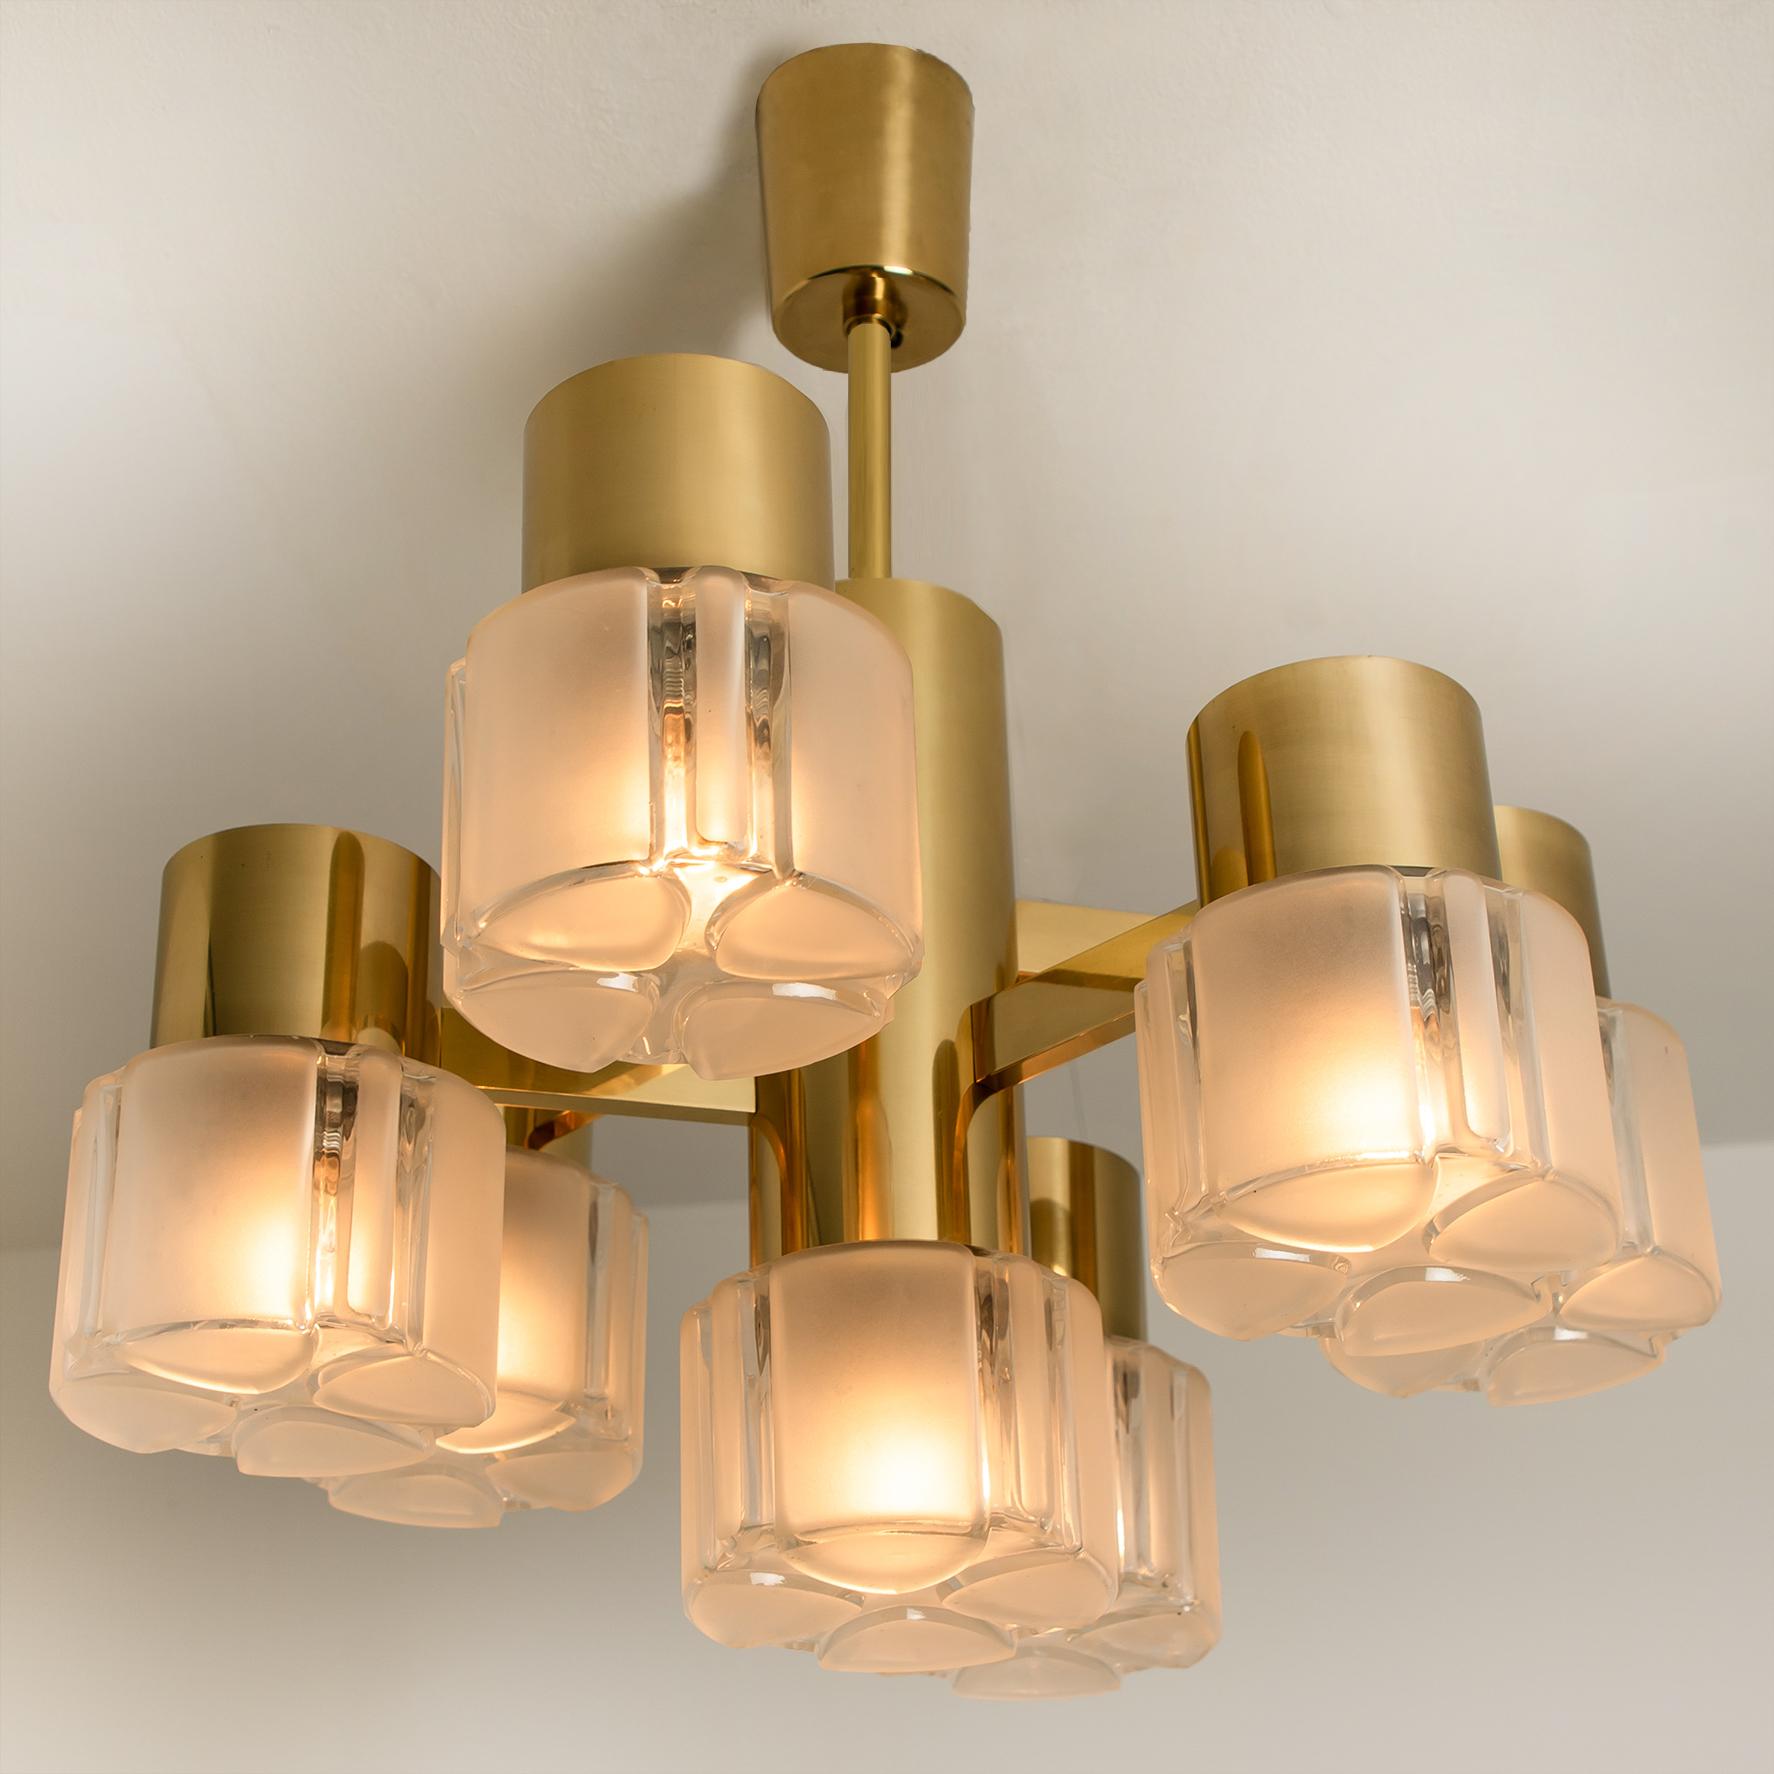 Hillebrand Chandelier Matt and Clear Glass Shades and Brass, circa 1970s Germany For Sale 1